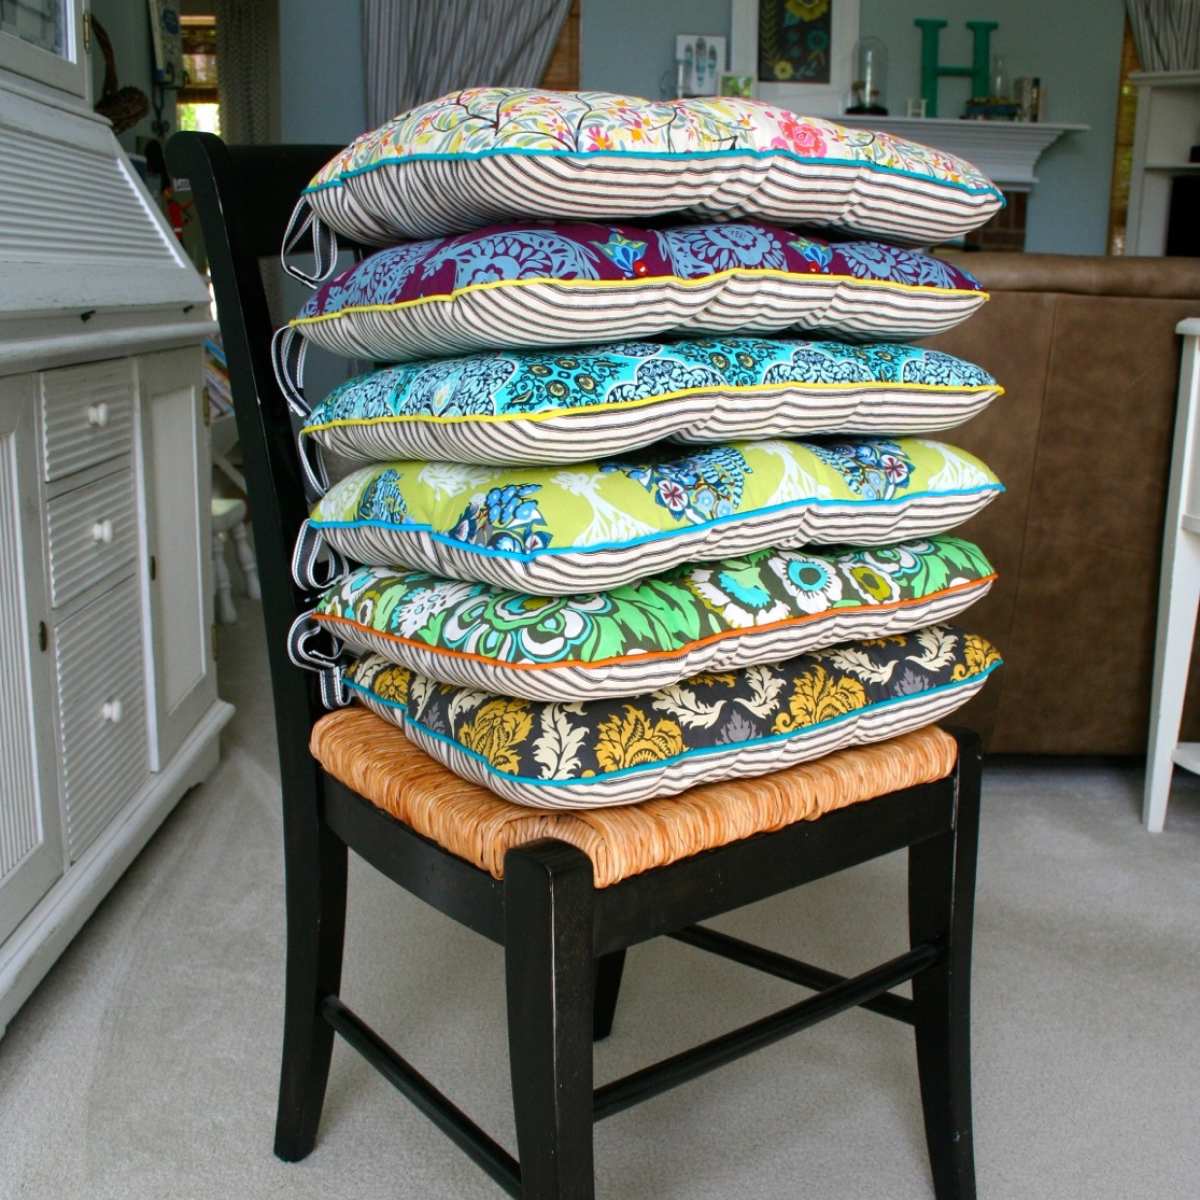 How To Build Chair Cushions